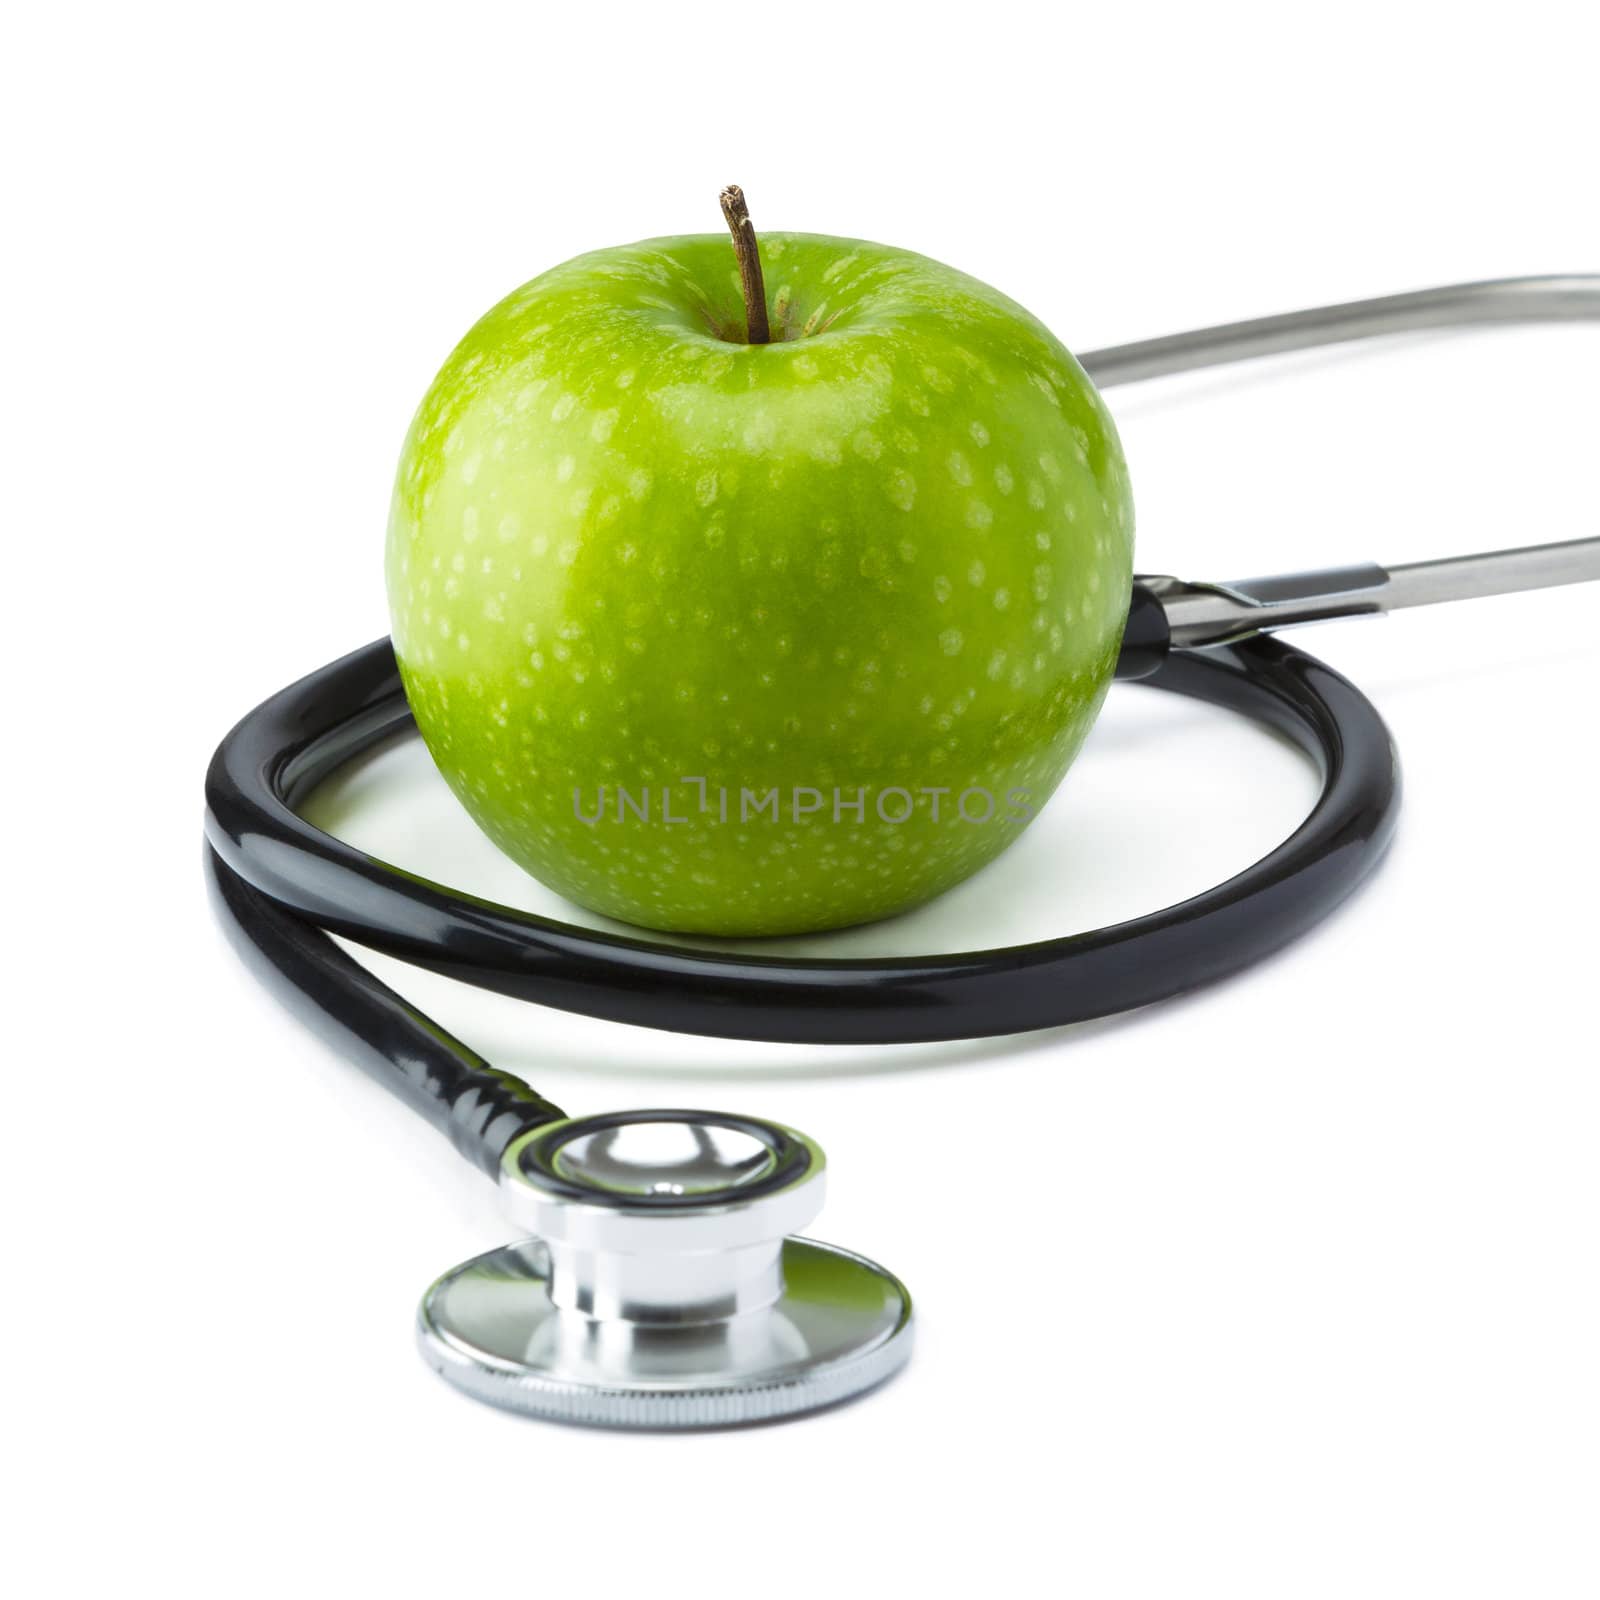 Green Apple Granny Smith with medical stethoscope isolated on white background for healthy eating